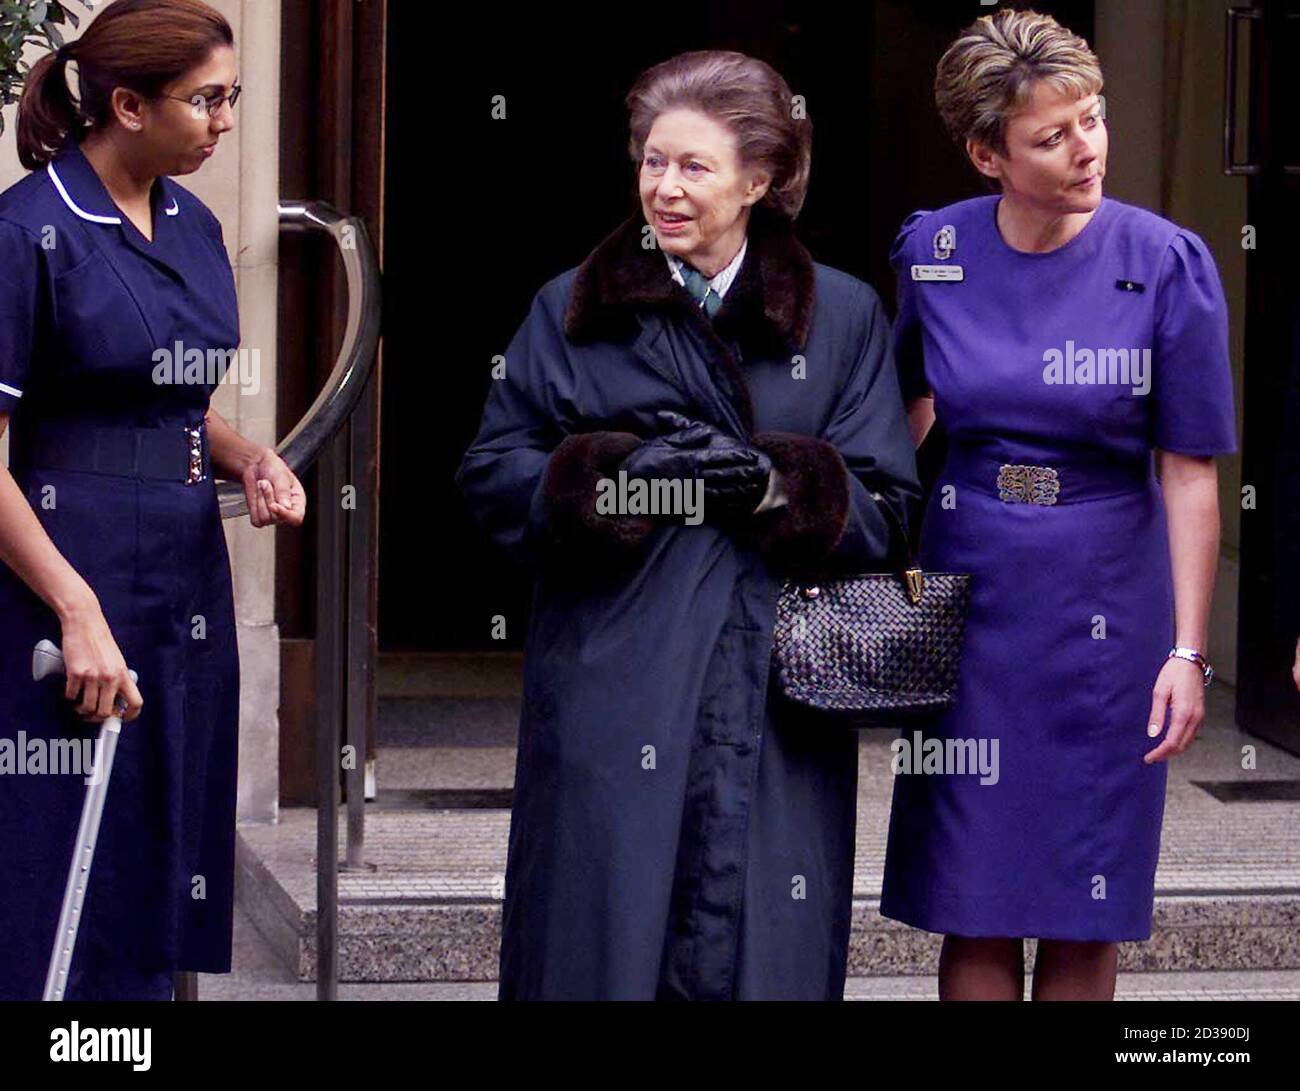 Britain's Princess Margaret (C) is helped by nurses as she leaves the King Edward VII Hospital in London after responding well to treatment January 20, 2001. The Princess has made an enormous improvement after being admitted to the hospital for suffering from a severe loss of appetite after having a suspected second stroke just before Christmas, she is expected to go to Kensington Palace and will rejoin the Queen at Sandringham on Monday.  JE/BR Stock Photo